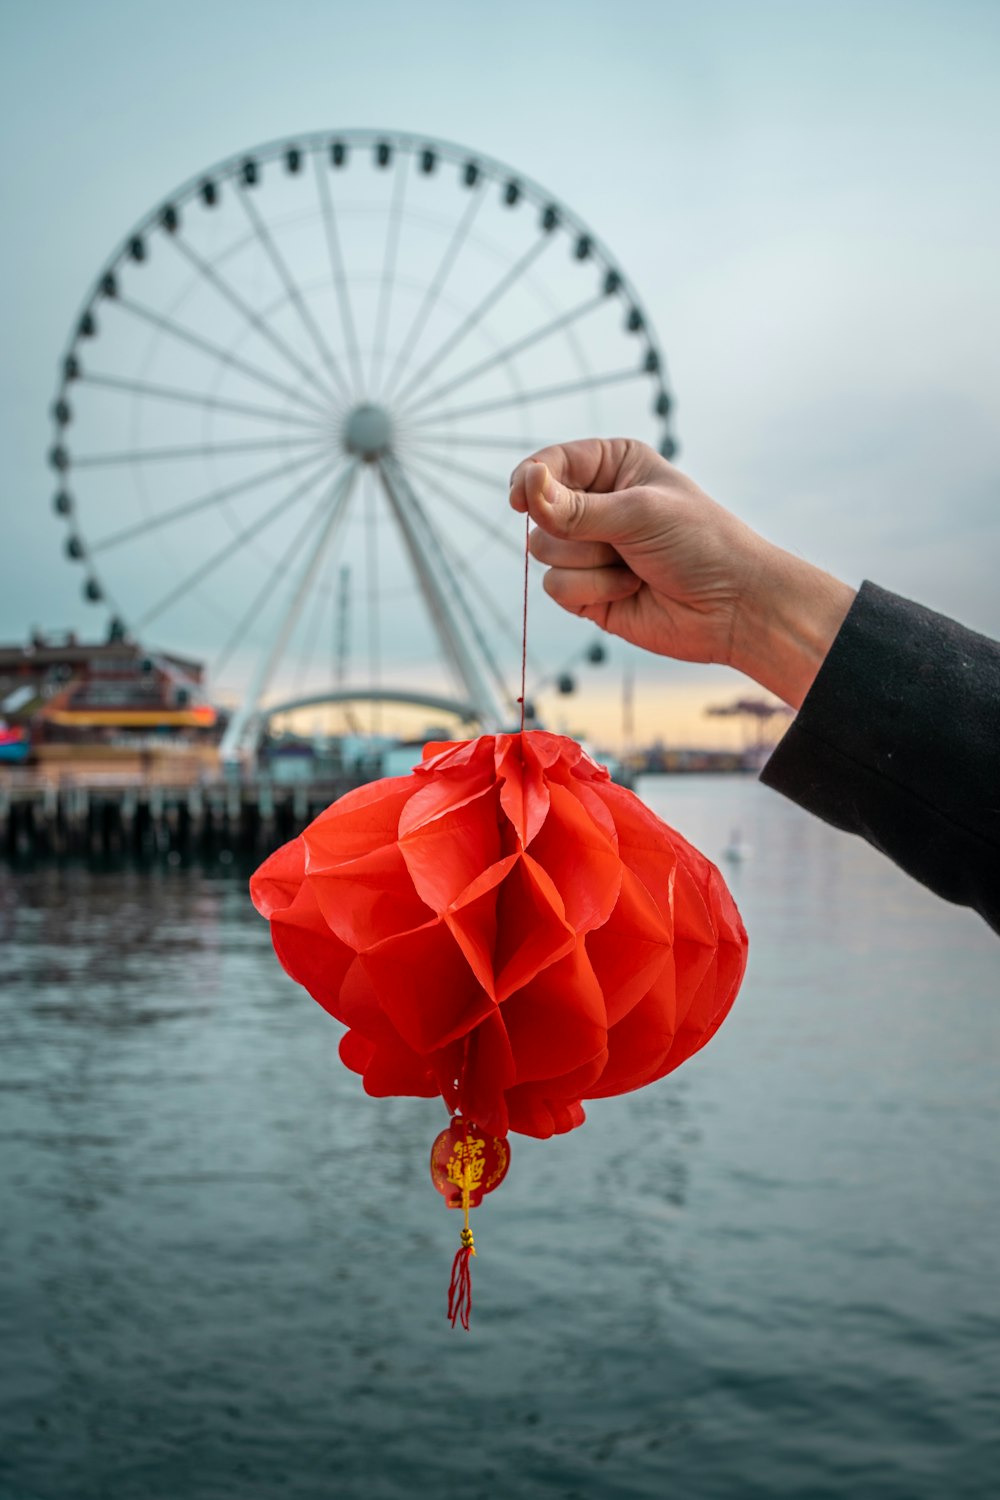 a person holding a red paper lantern in front of a ferris wheel